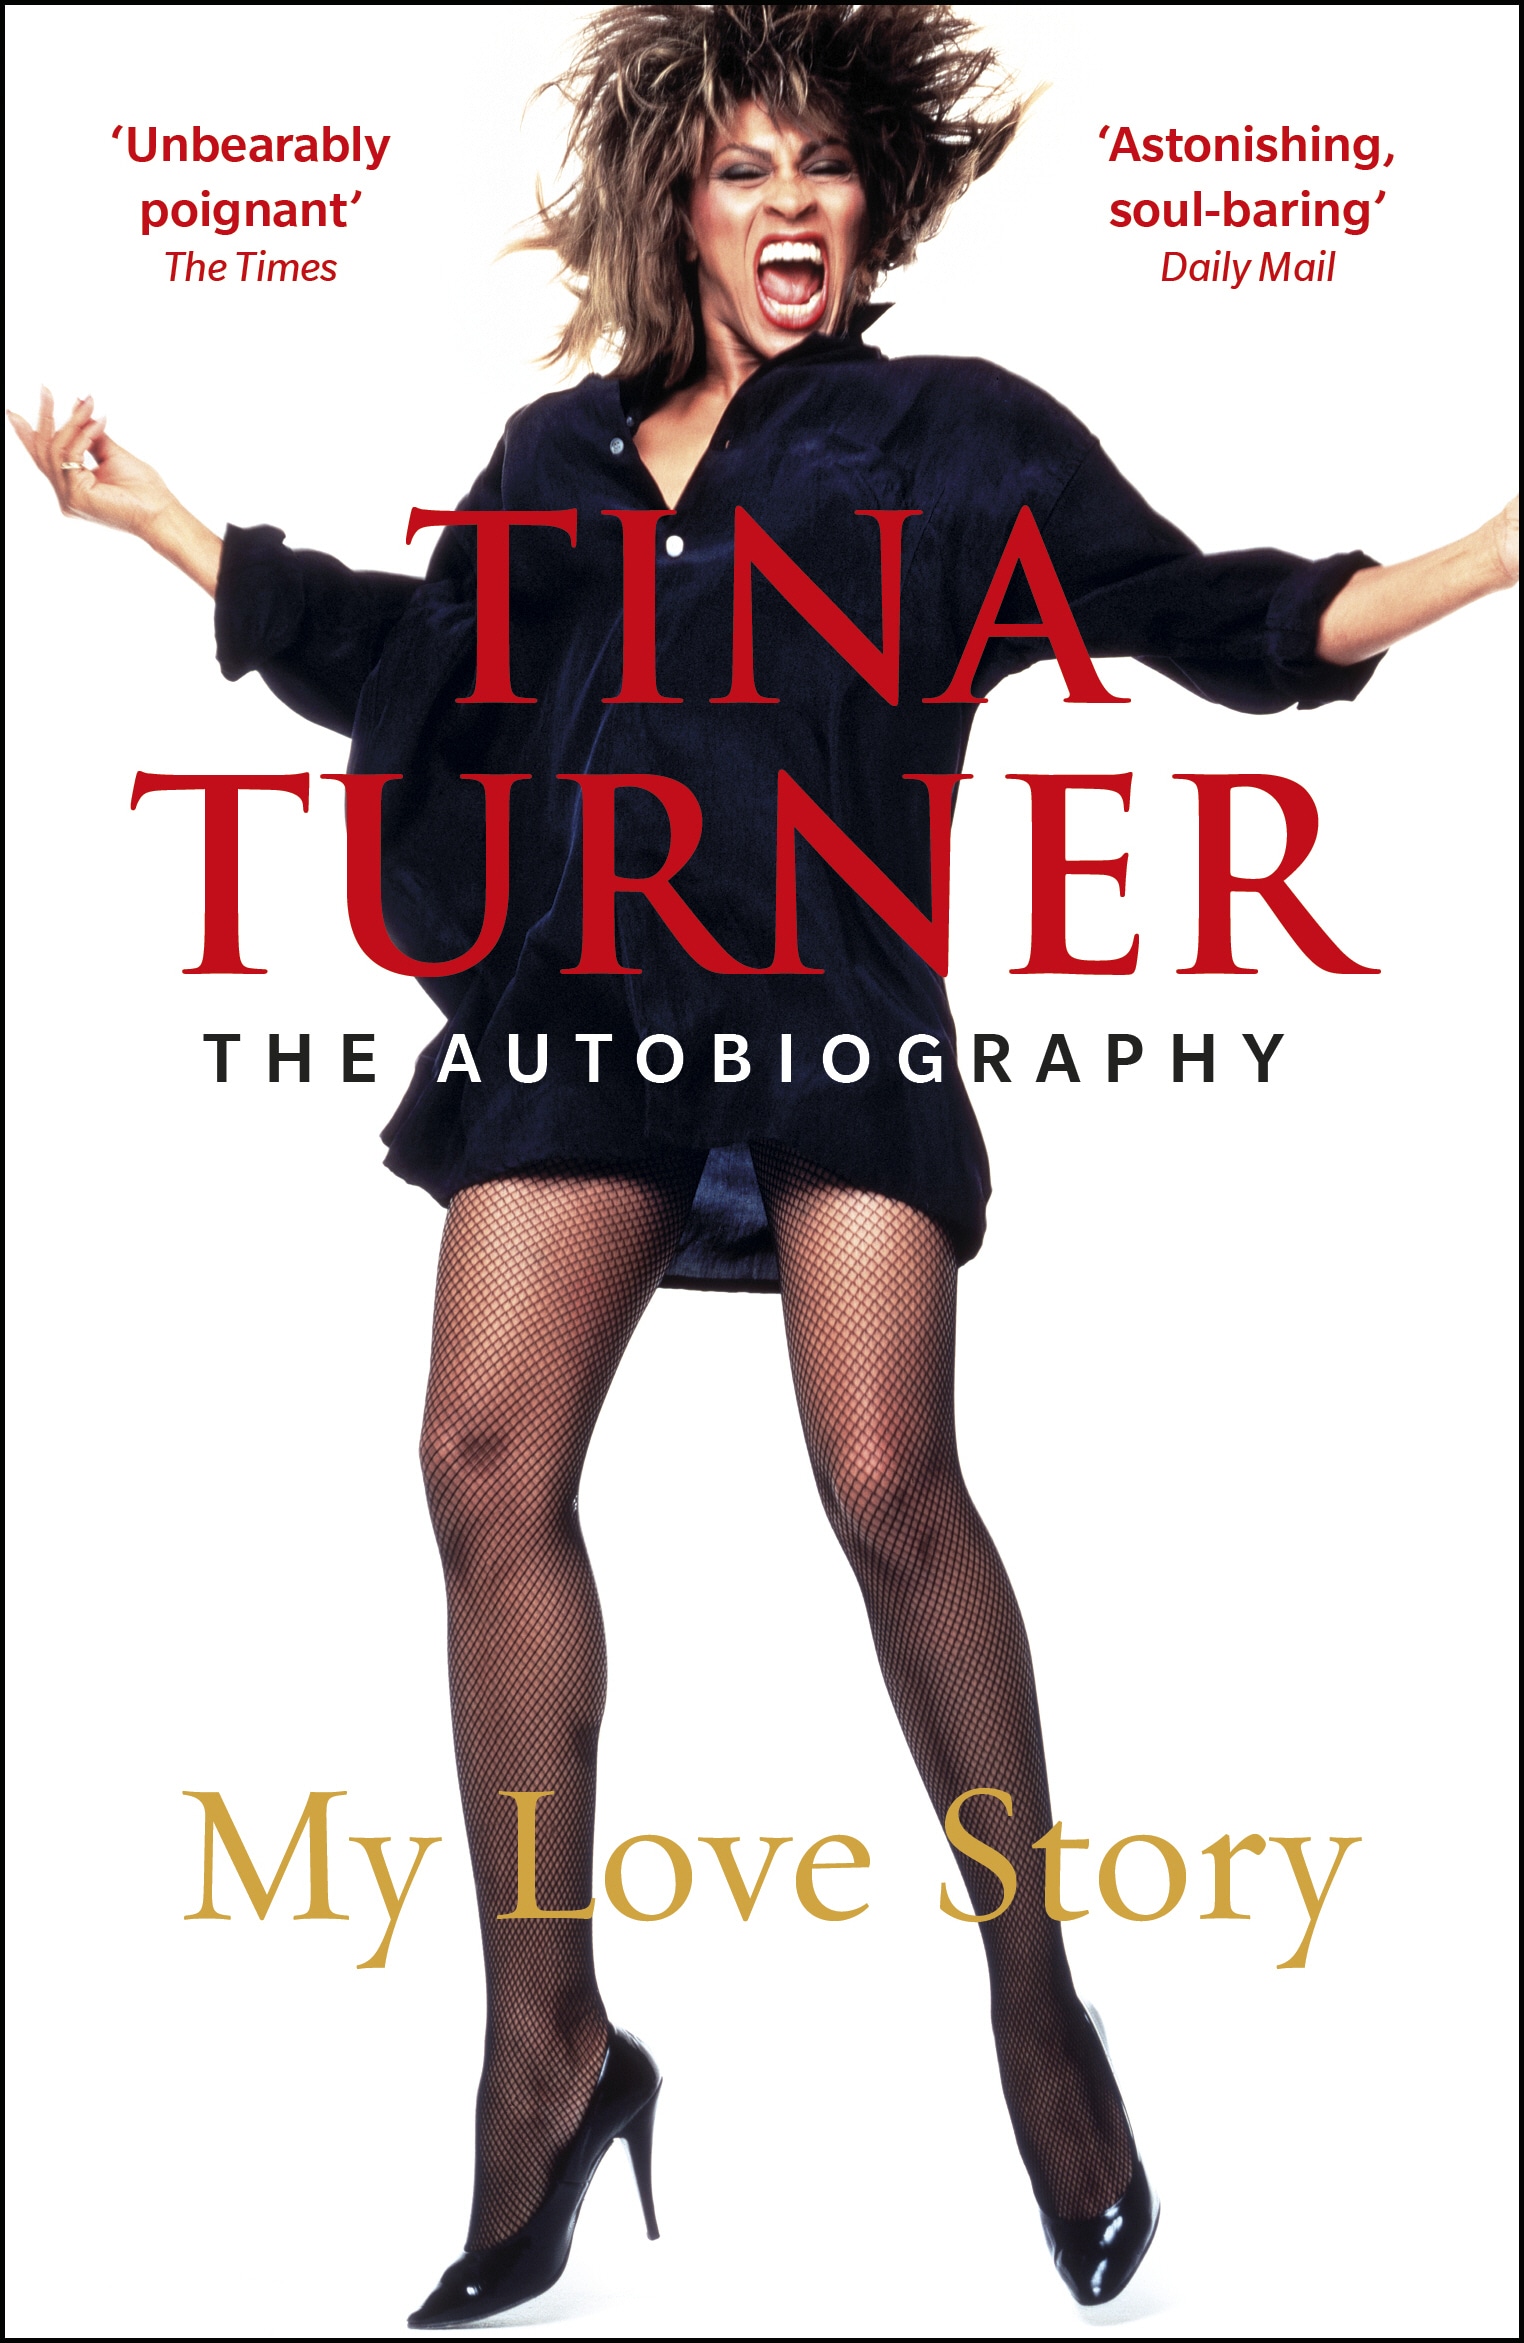 Book “My Love Story” by Tina Turner — March 21, 2019